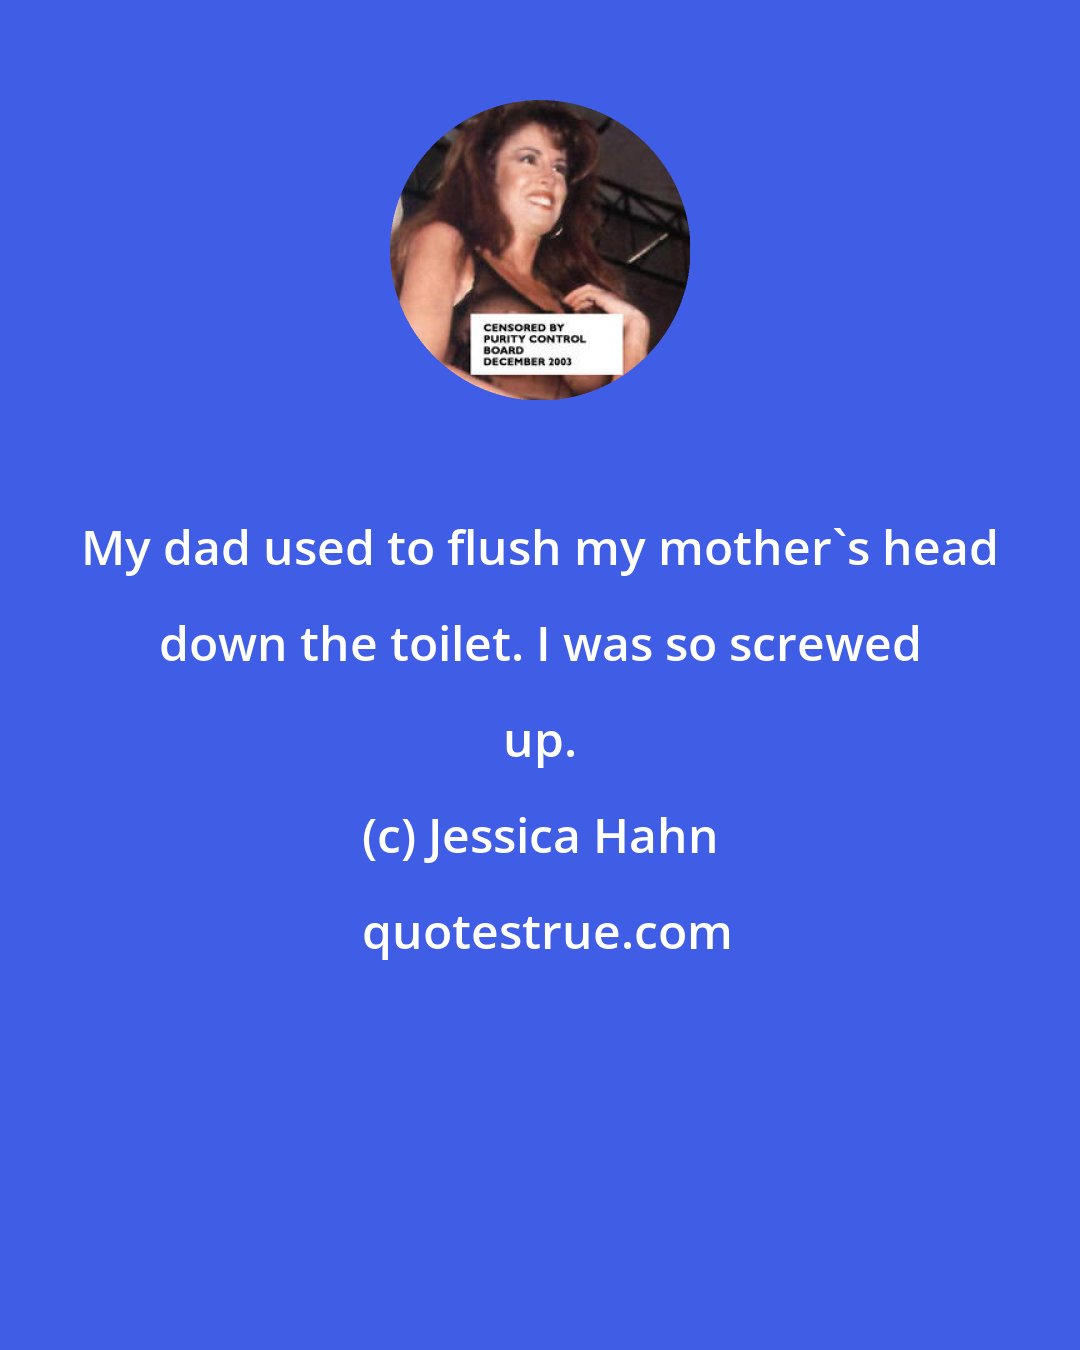 Jessica Hahn: My dad used to flush my mother's head down the toilet. I was so screwed up.